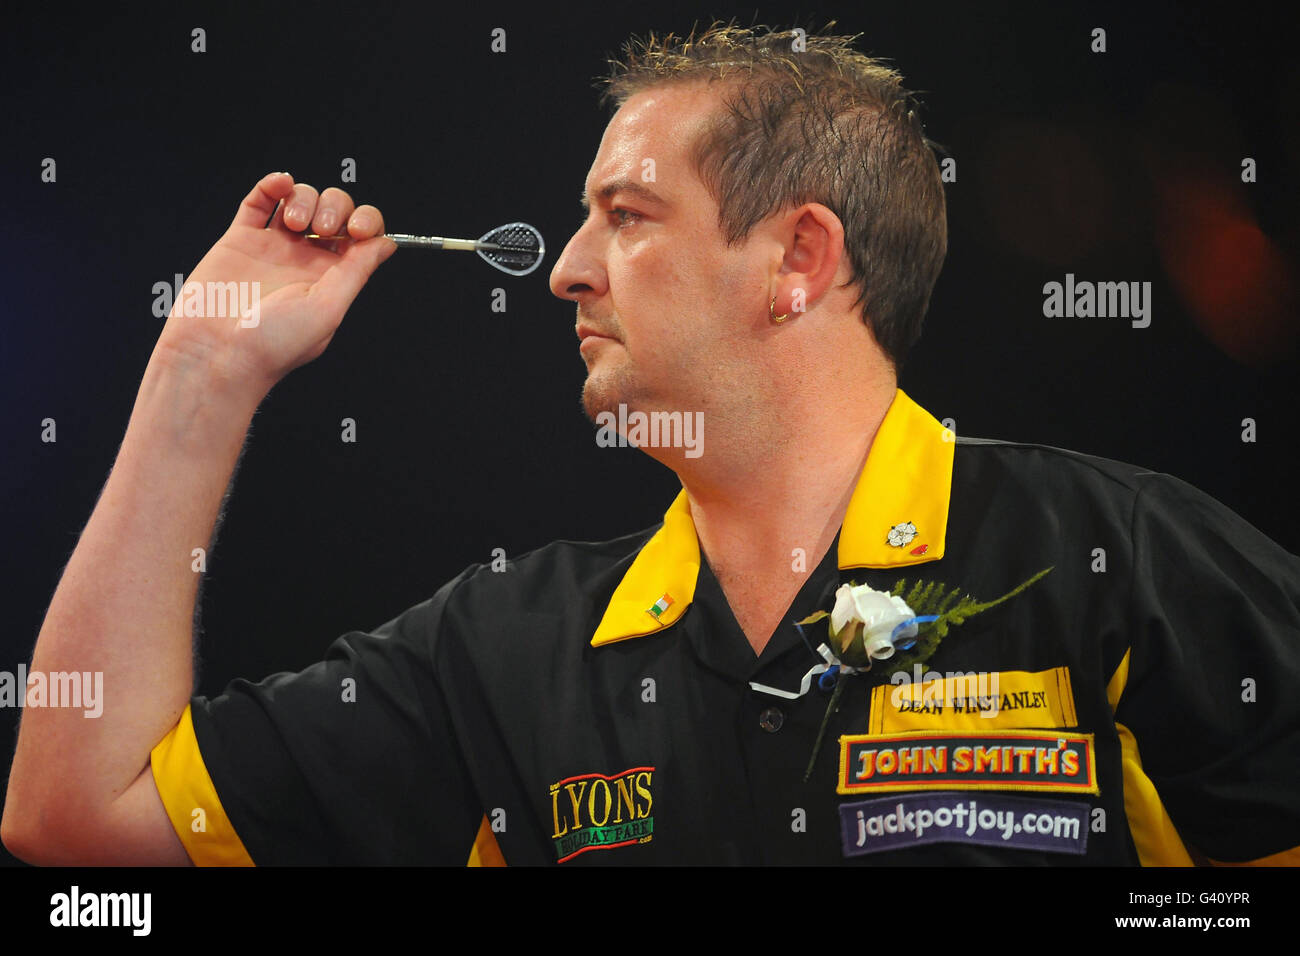 England's Dean Winstanley in action during his final against England's Martin Adams during the BDO World Professional Darts Championship at the Lakeside Complex, Surrey. Stock Photo